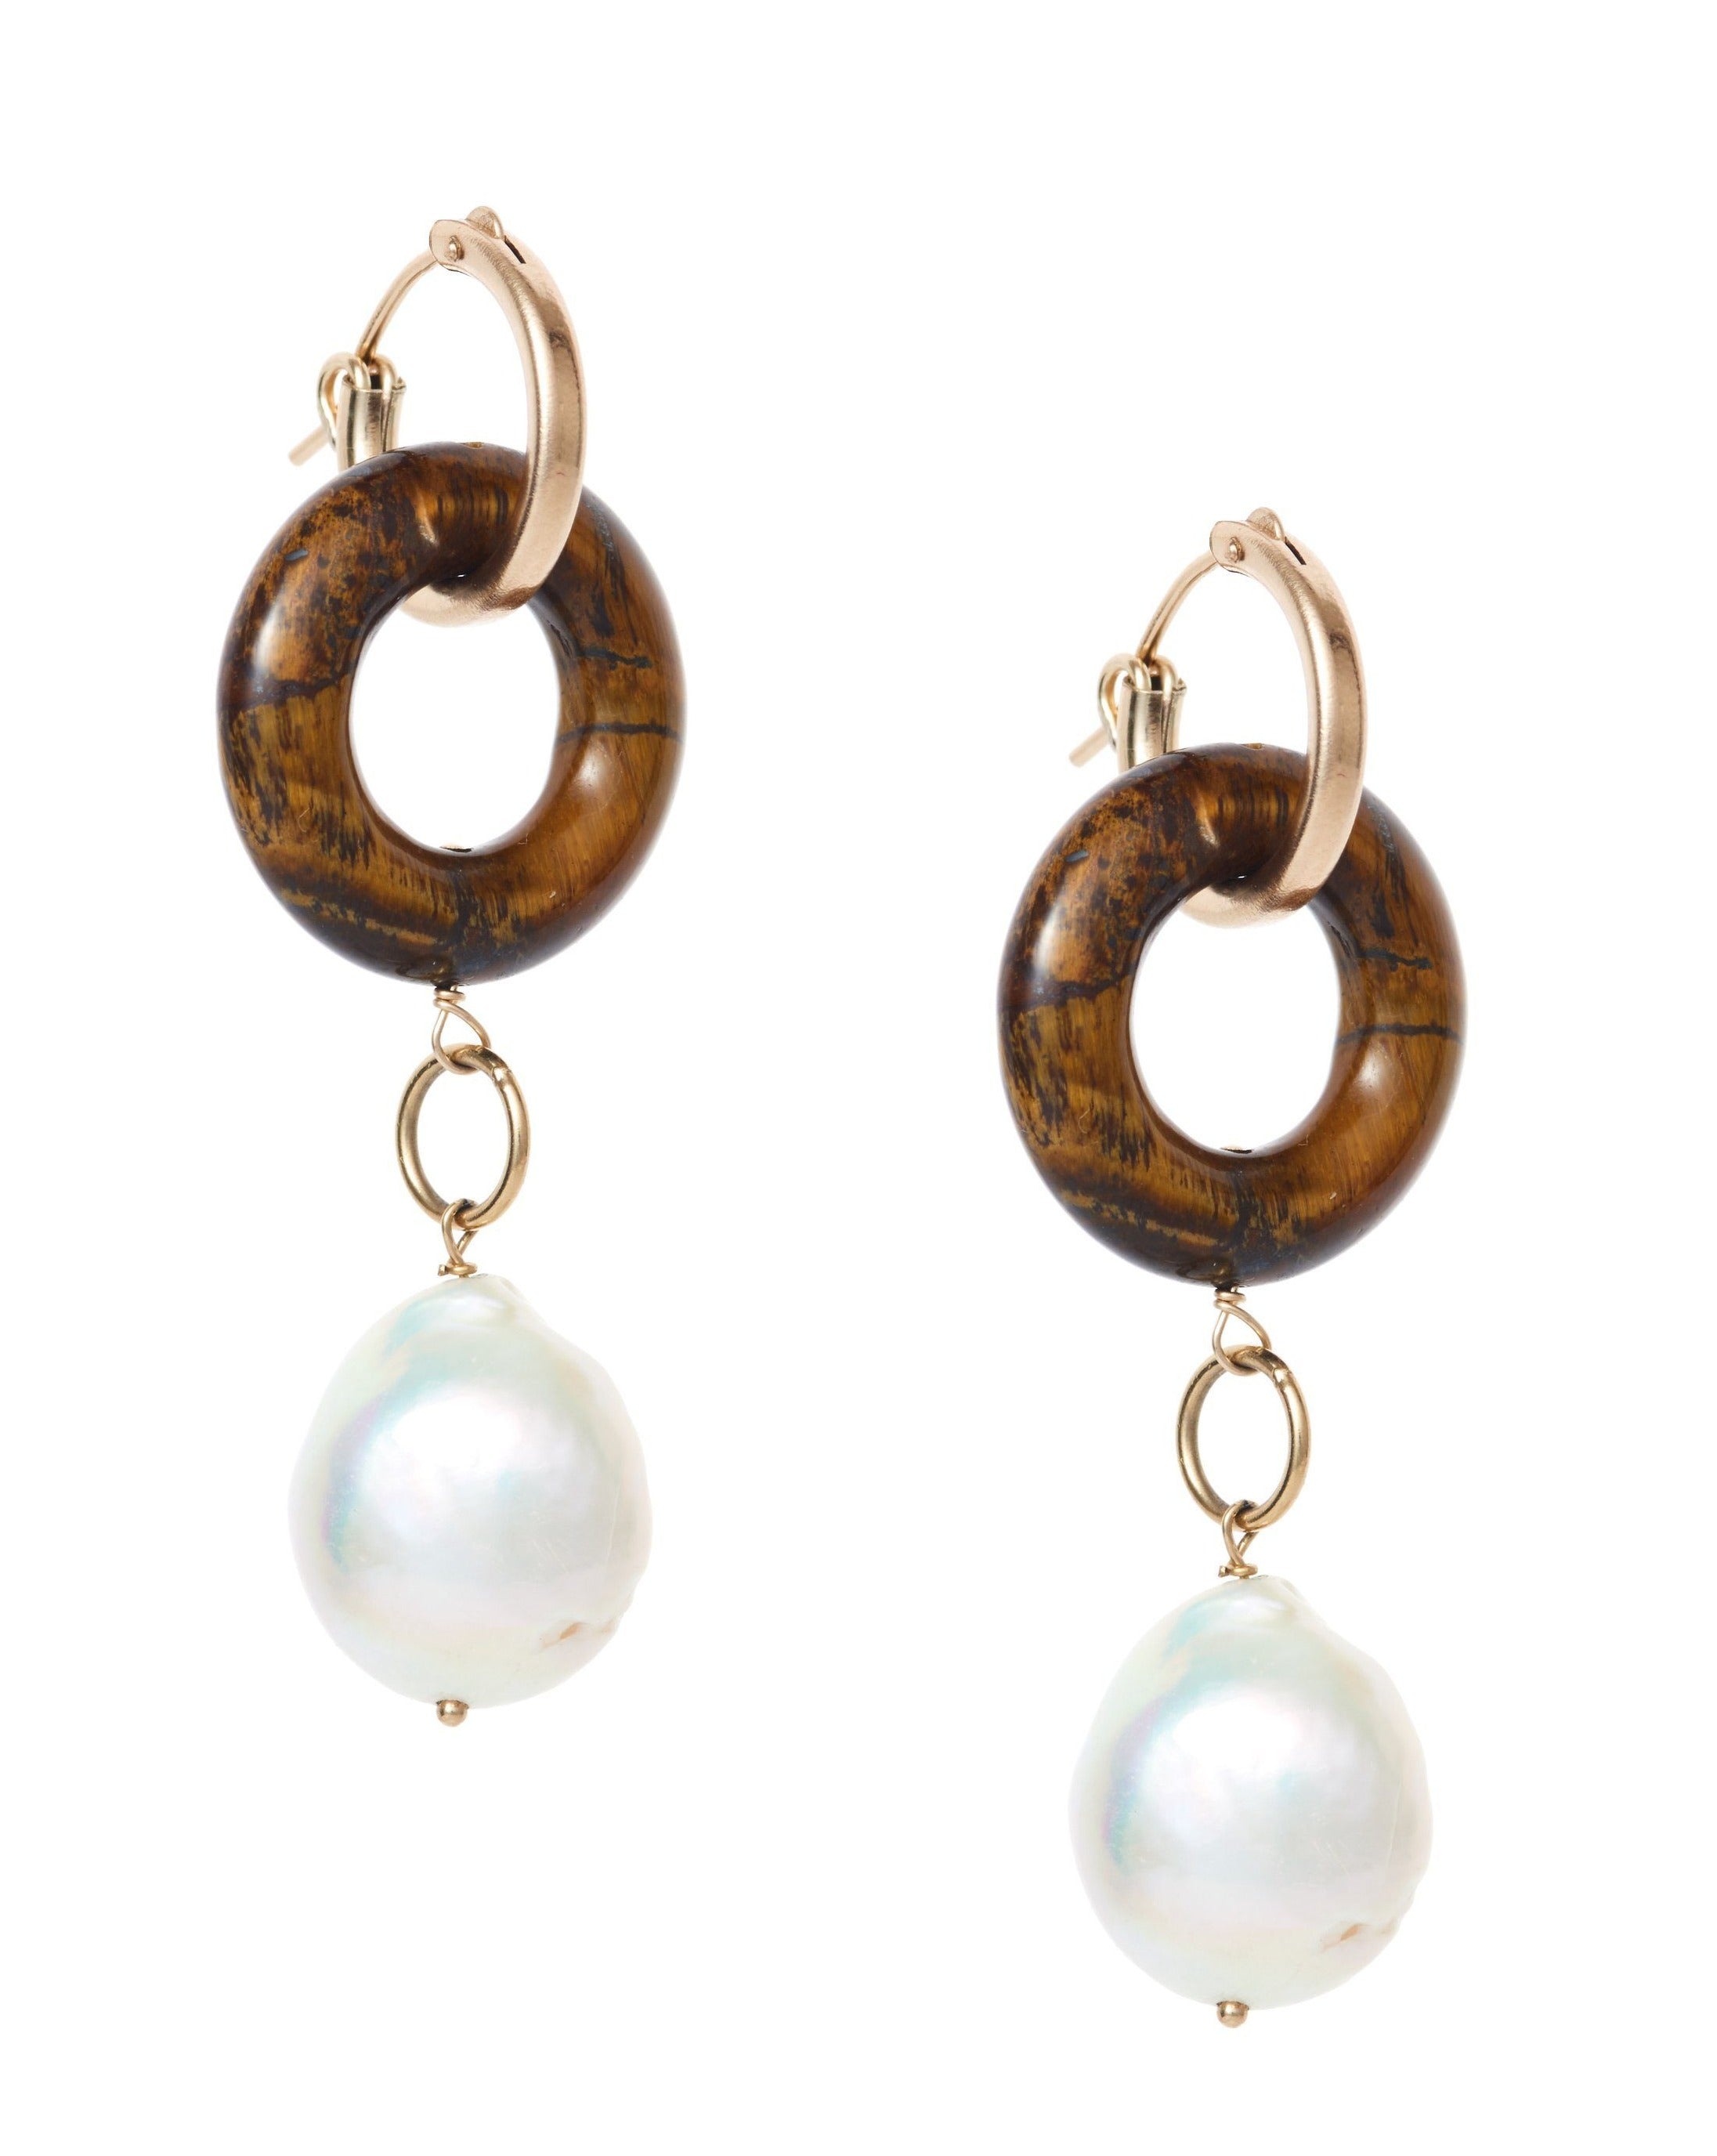 Cerceau Pearl Hoops by Kozakh. 15mm hoop dangling earrings with snap closure, crafted in 14K Gold Filled, featuring a doughnut shape Tiger's Eye gemstone and a Baroque Pearl.